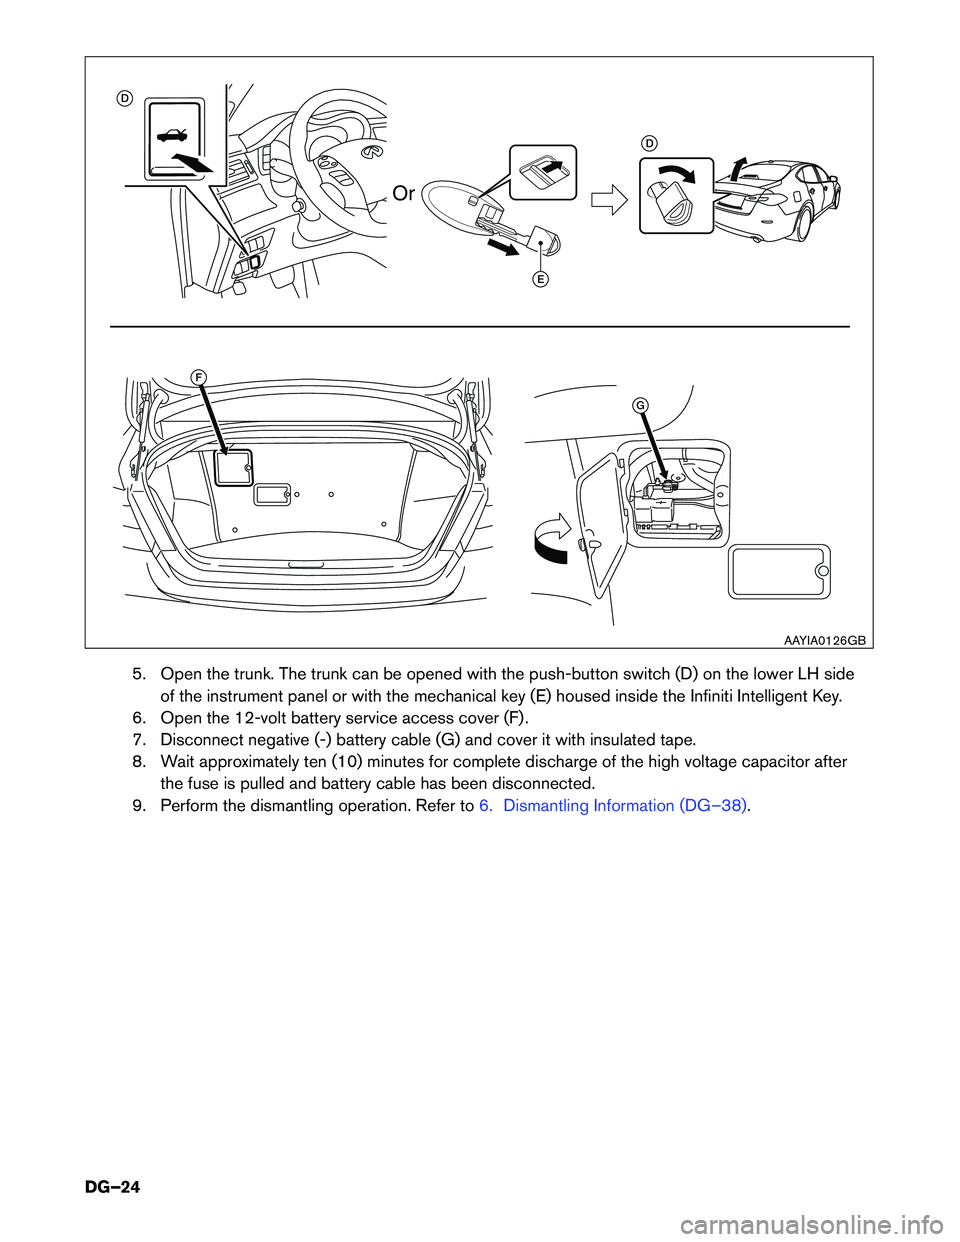 INFINITI Q70 HYBRID 2015  Dismantling Guide 5. Open the trunk. The trunk can be opened with the push-button switch (D) on the lower LH sideof the instrument panel or with the mechanical key (E) housed inside the Infiniti Intelligent Key.
6. Ope